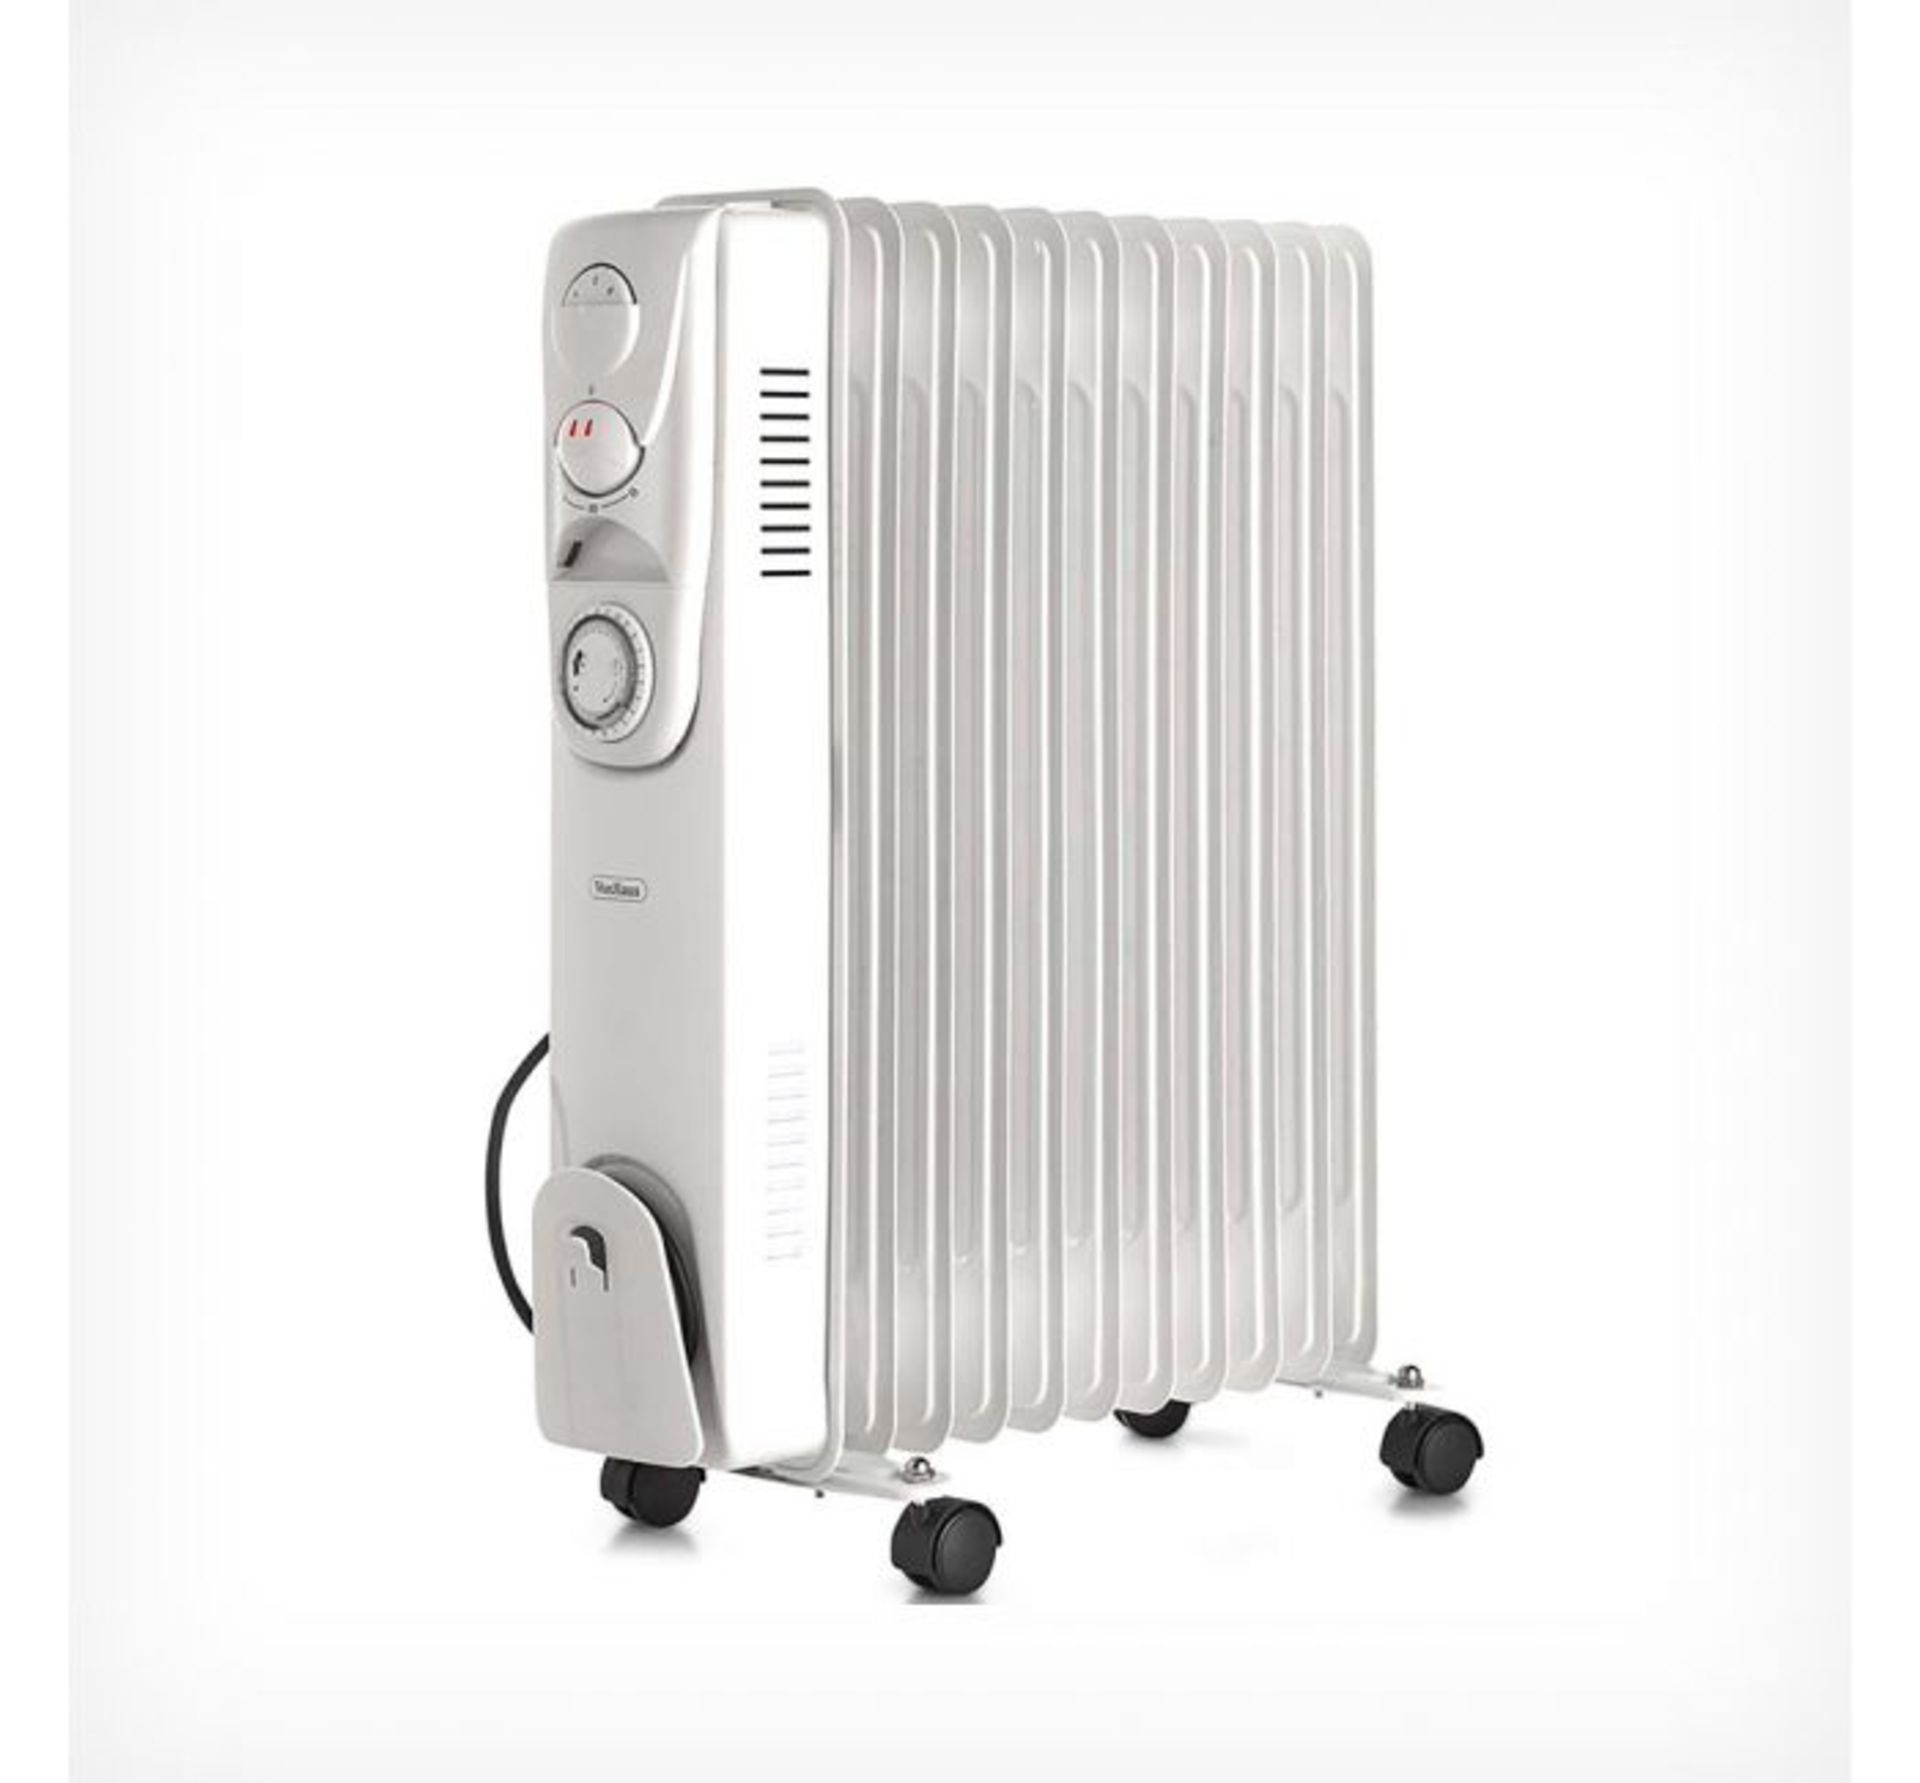 (TD31) 11 Fin 2500W Oil Filled Radiator - White Suitable for areas up to 28 square metres 3 p... - Image 3 of 3